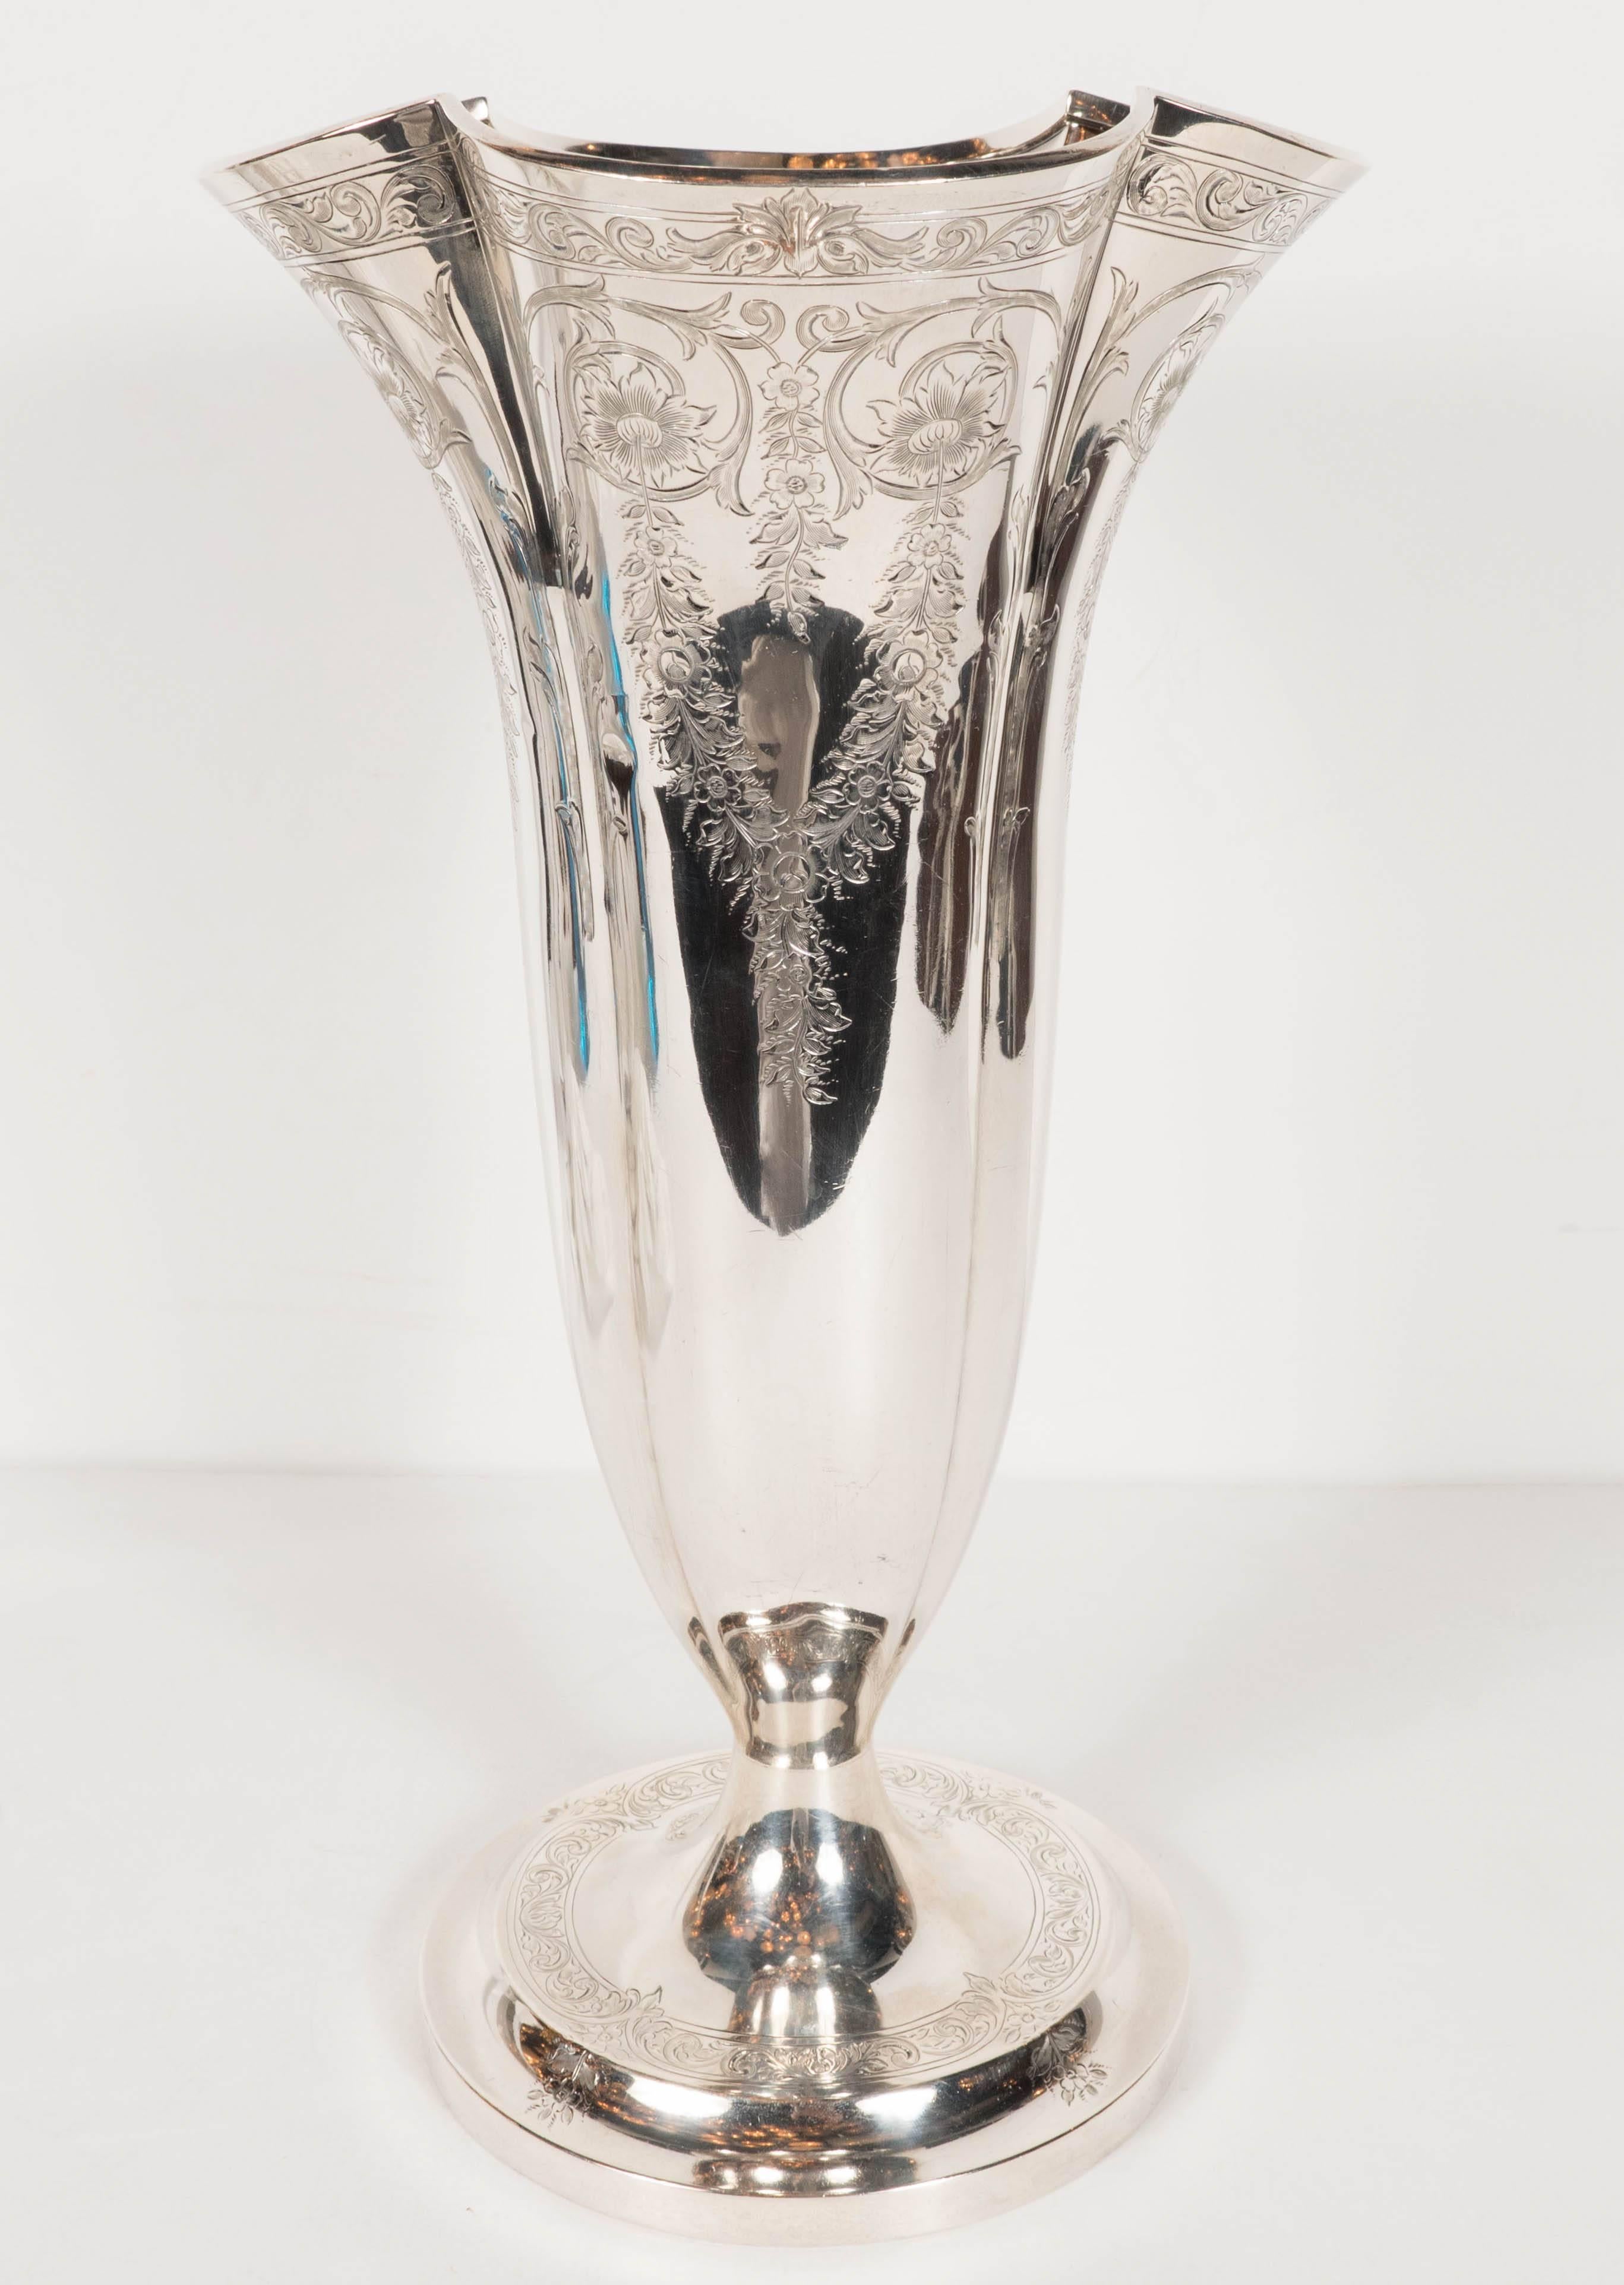 Early 20th Century Magnificent Edwardian Trumpet Vase in Sterling Silver by Howard and Co.